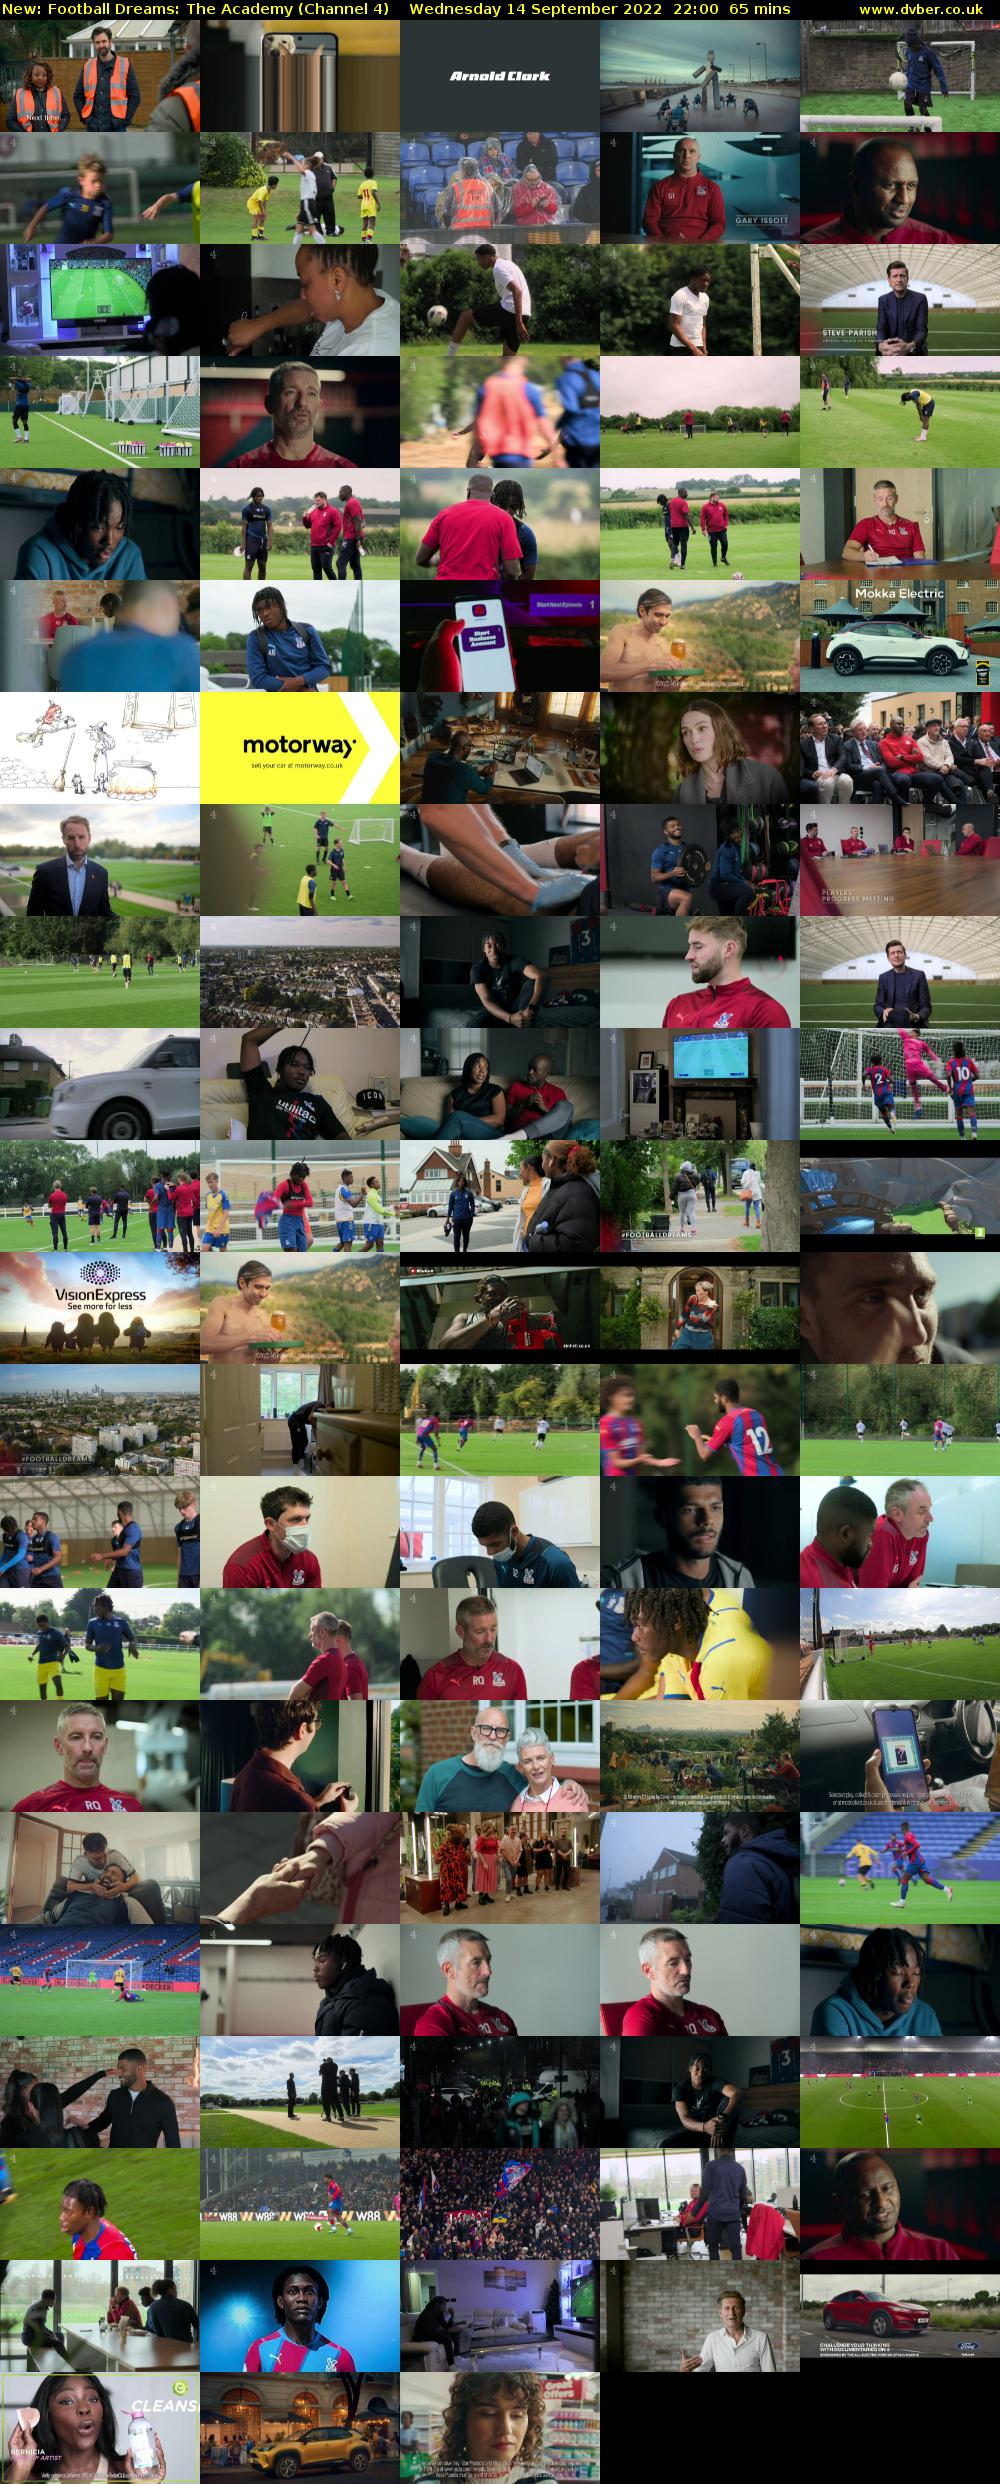 Football Dreams: The Academy (Channel 4) Wednesday 14 September 2022 22:00 - 23:05